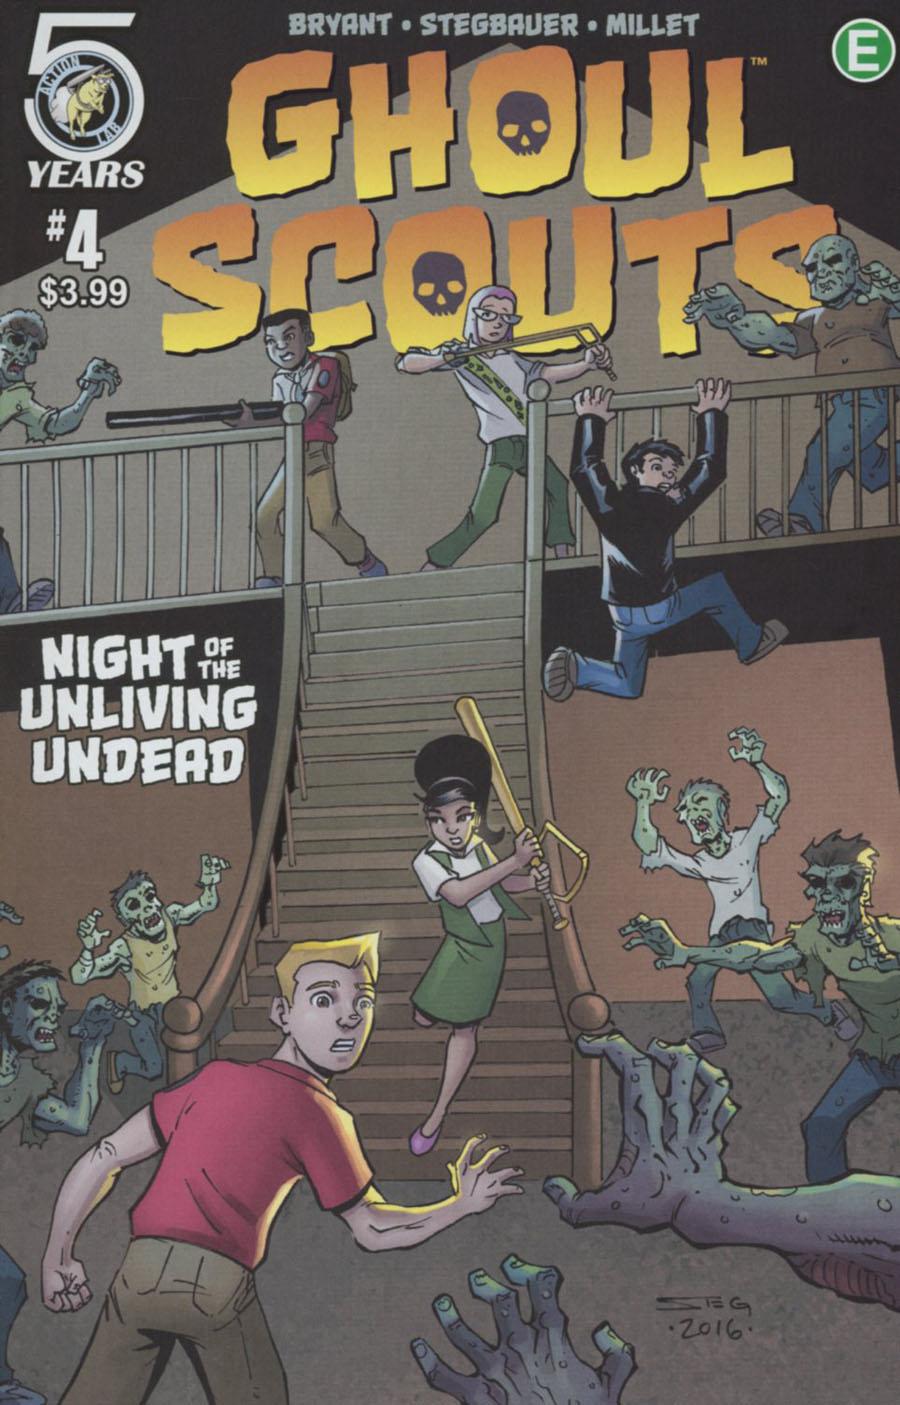 Ghoul Scouts Night Of The Unliving Undead Vol. 1 #4